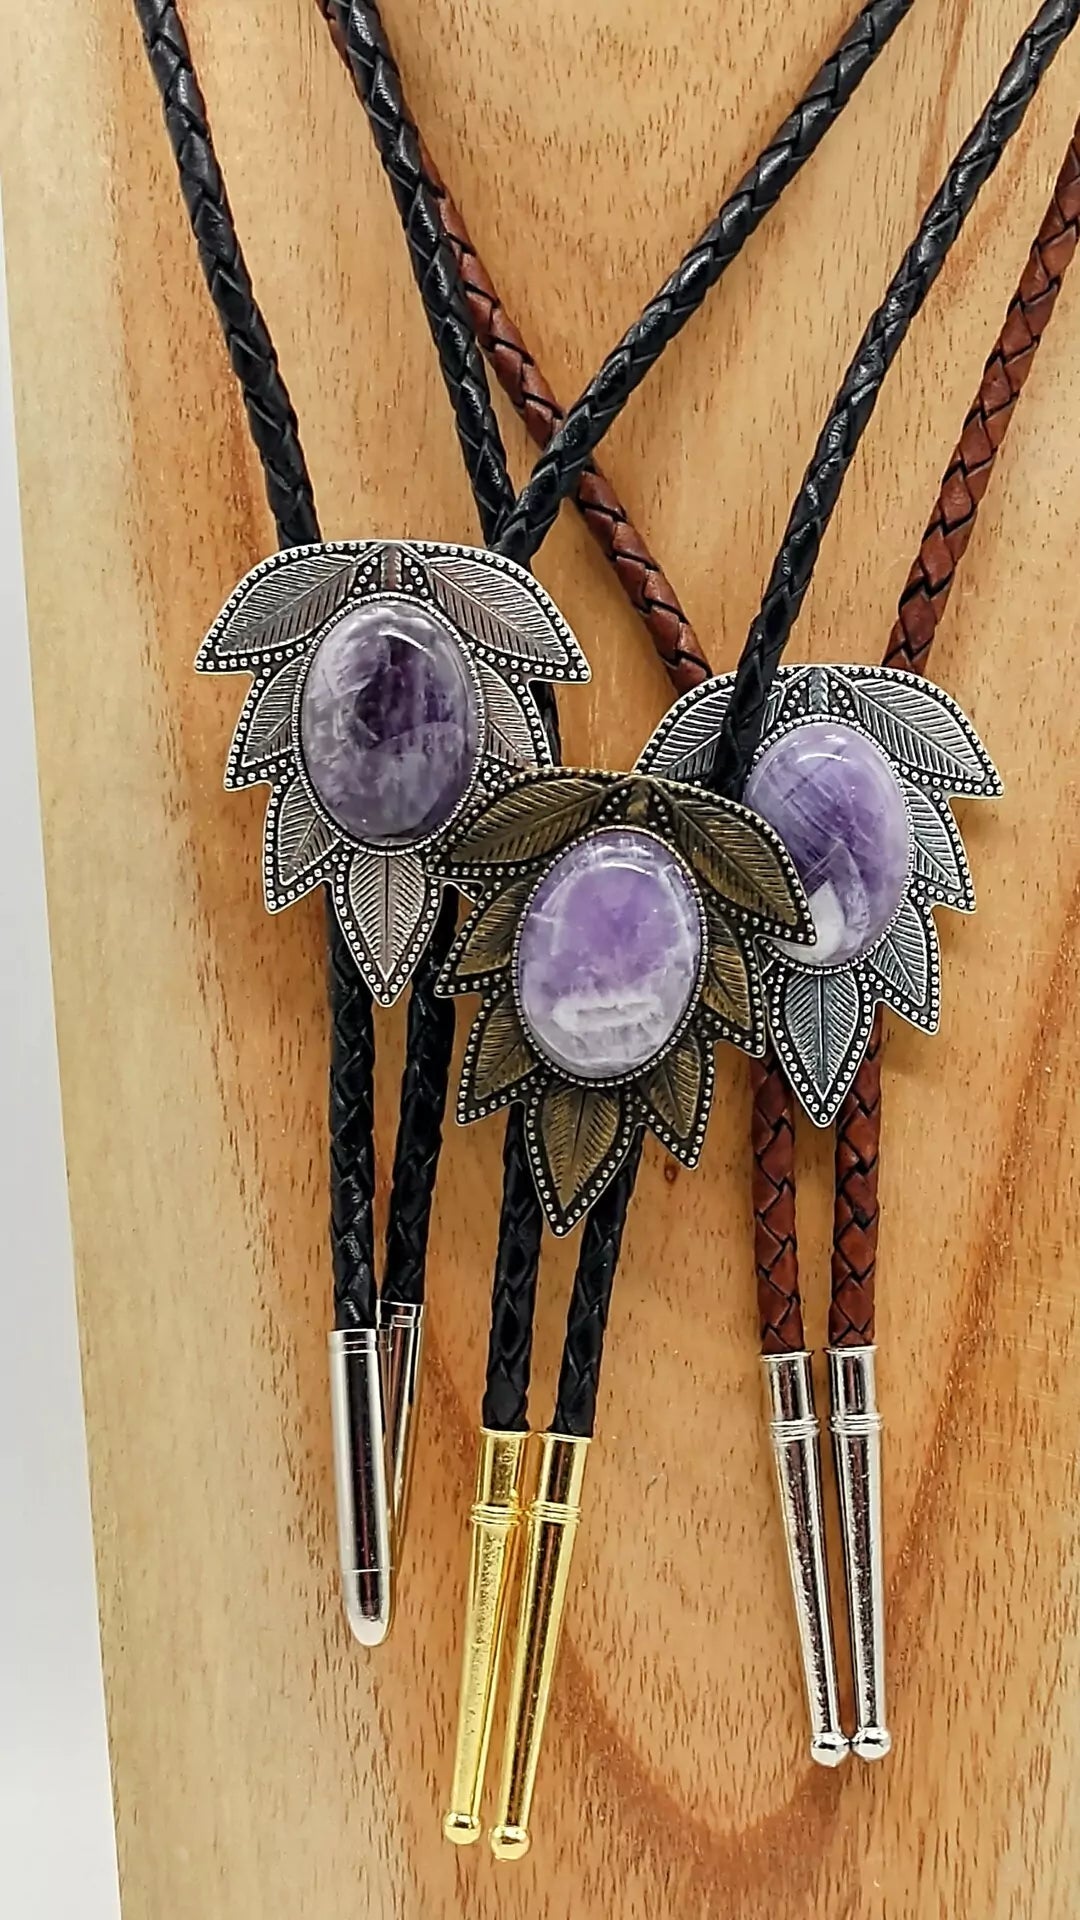 Amethyst Bolo Tie in Wisteria Setting Silver or Gold - Folks On The Edge